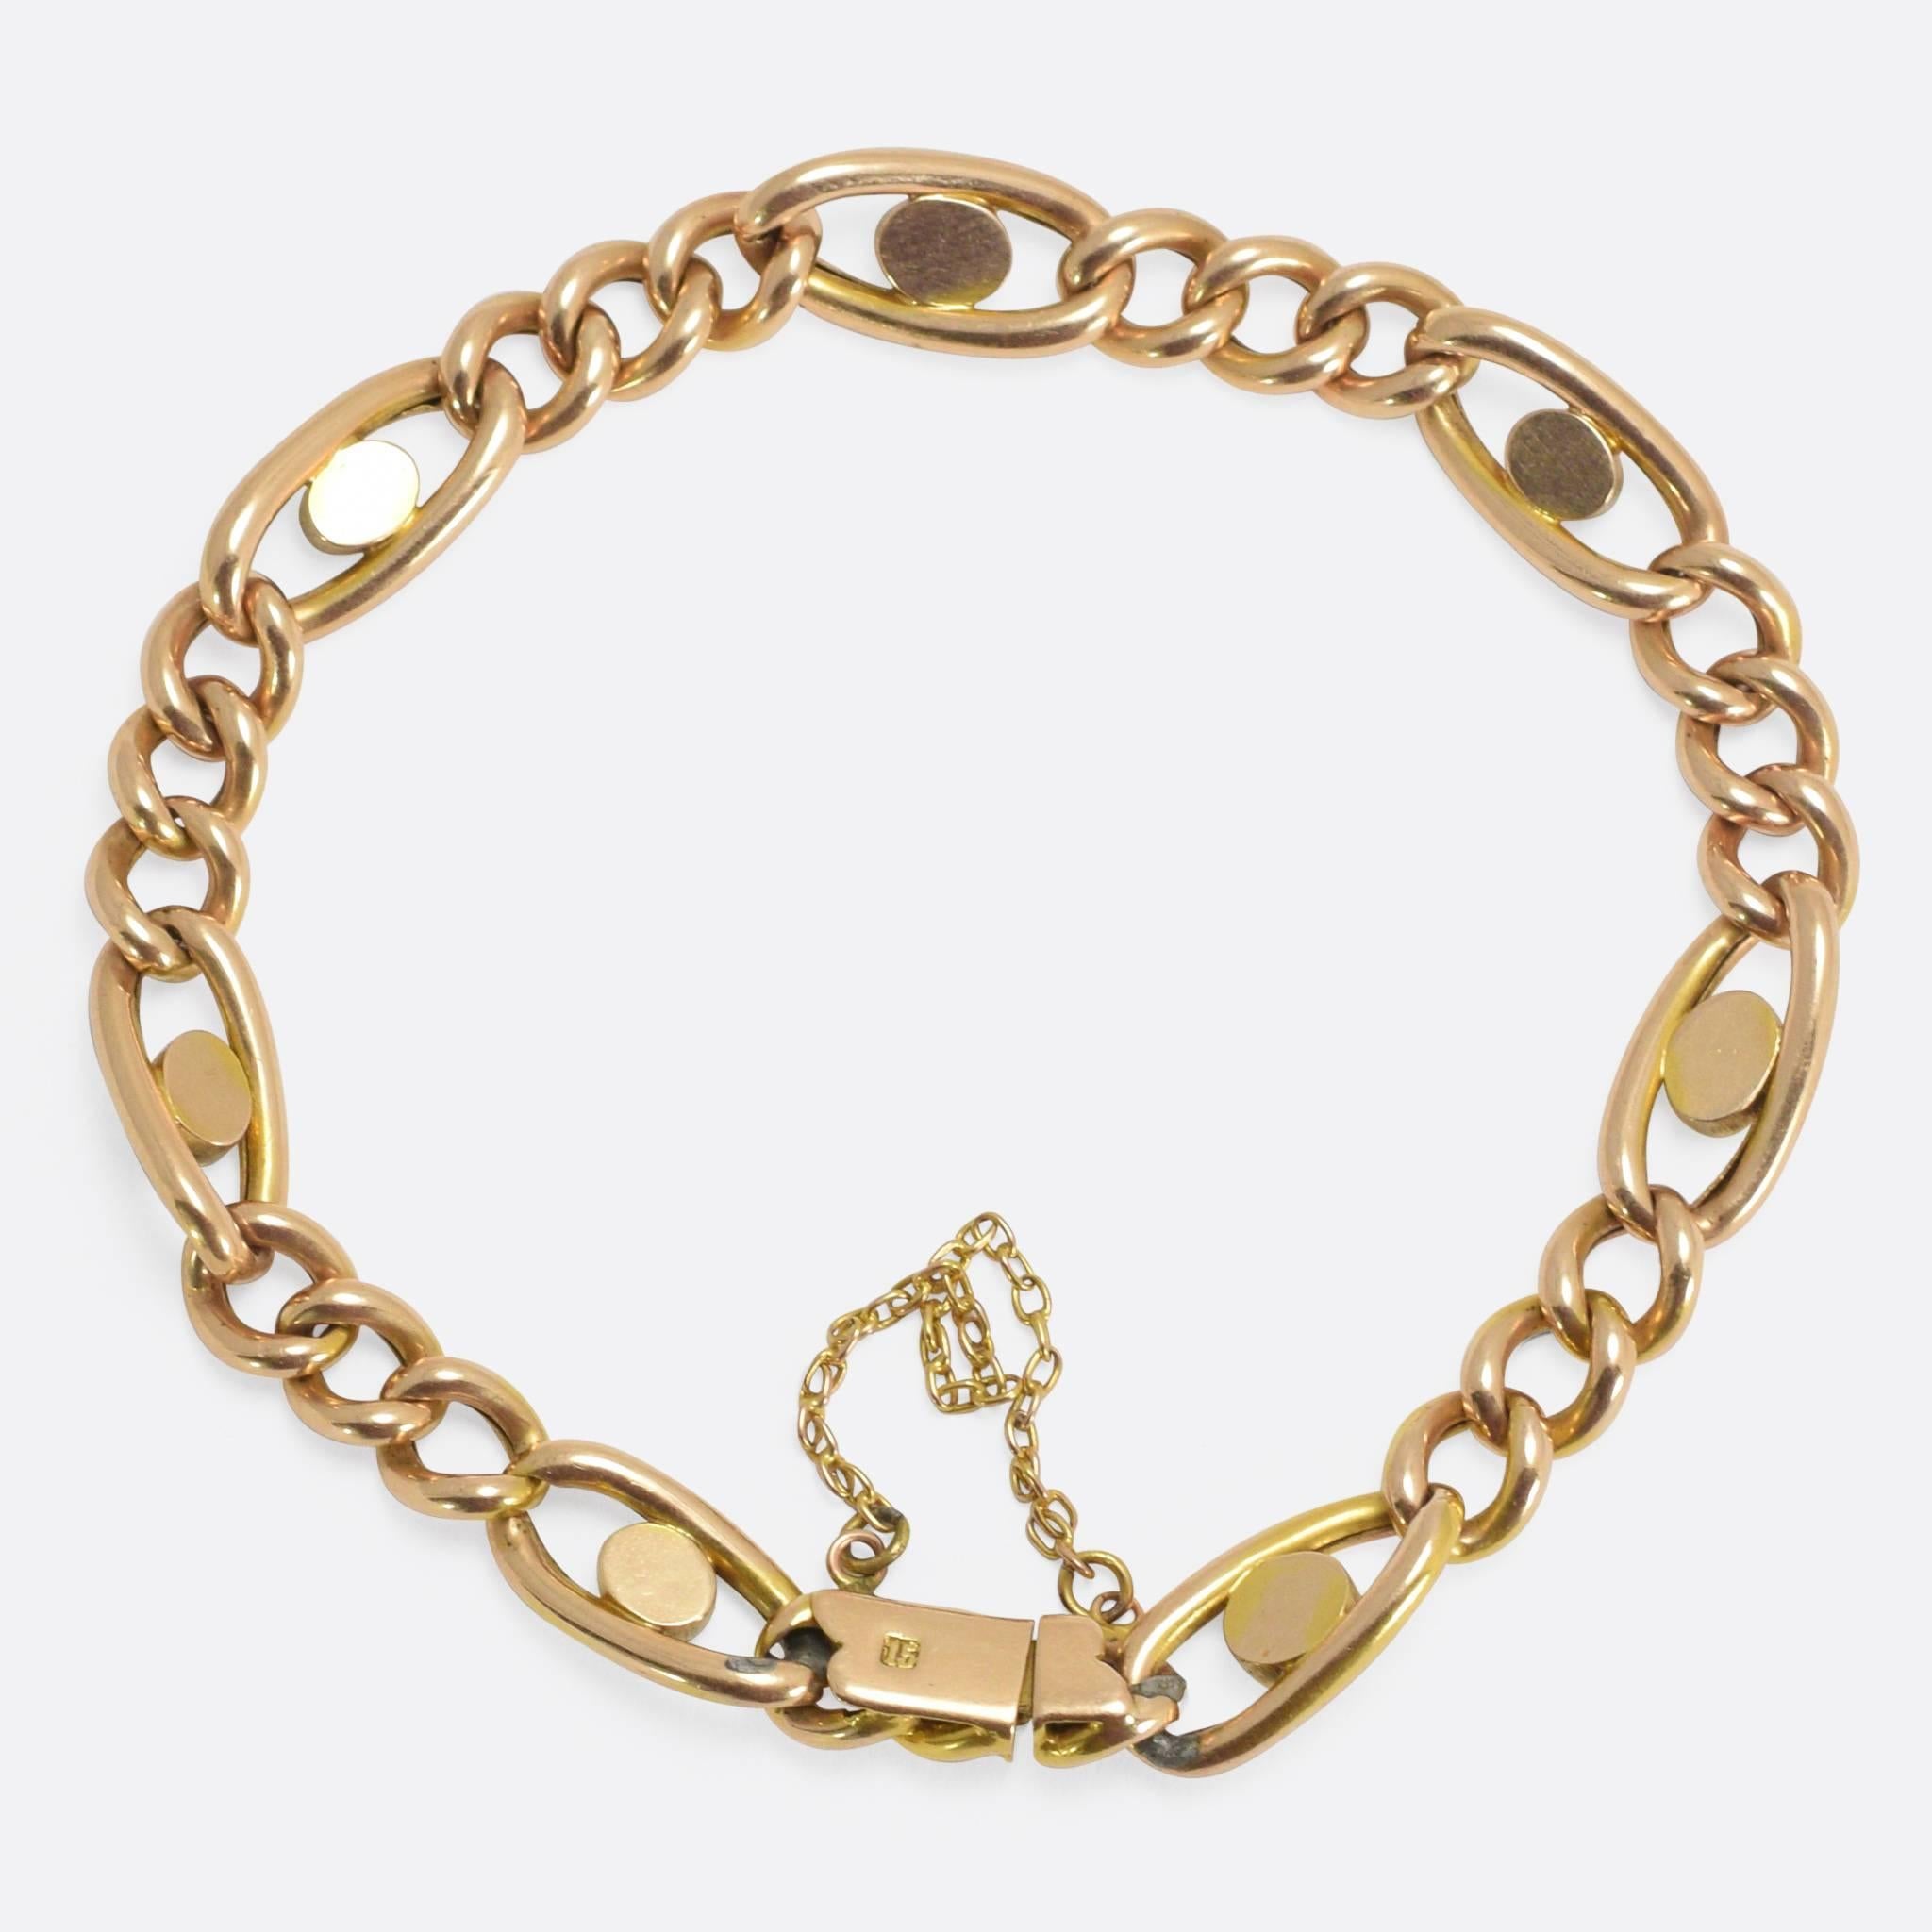 This elegant antique bracelet is modelled in 15k yellow gold, the classic curb-links modelled in 15k yellow gold. Every fourth link is formed as a wider oval, with a turquoise cabochon stone set in the centre, the design does not look unlike an eye